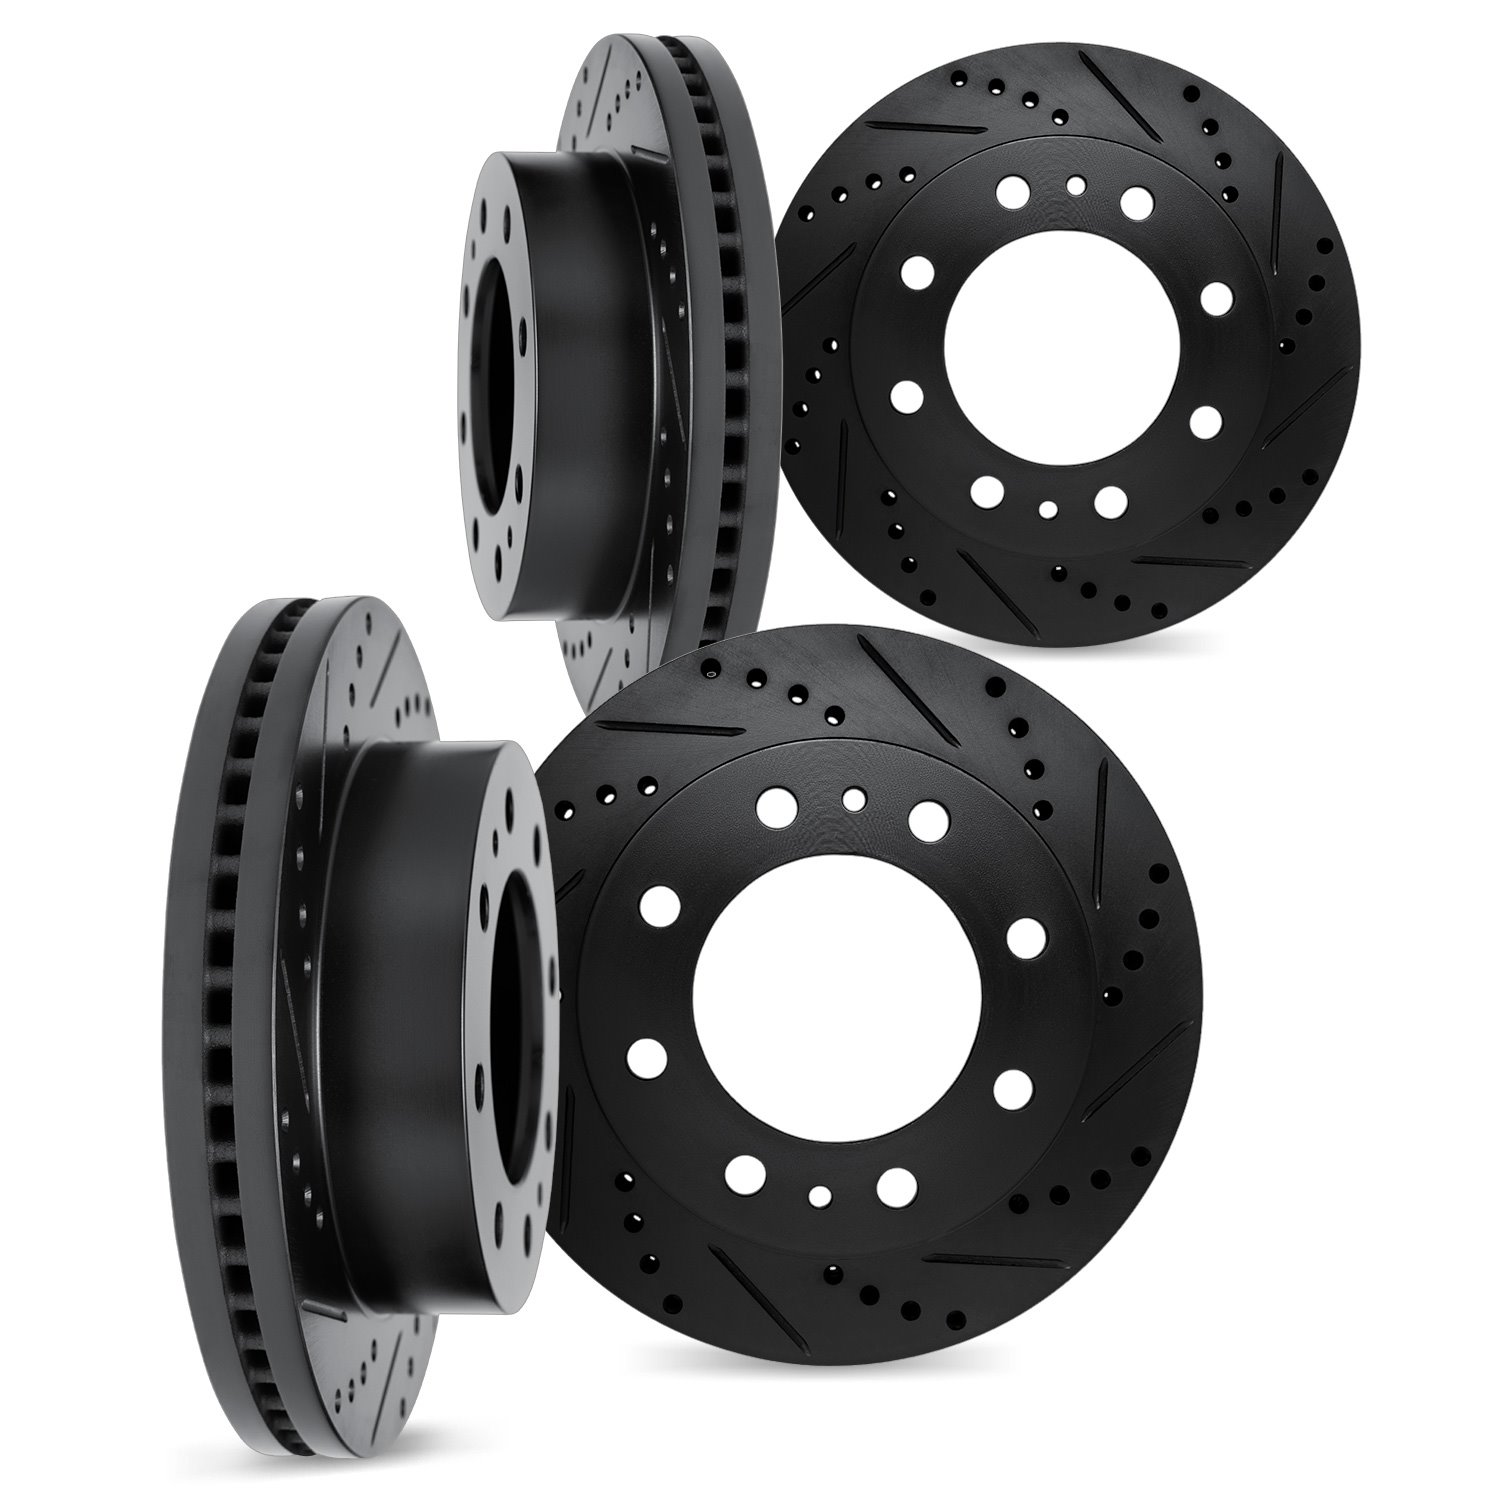 8004-54222 Drilled/Slotted Brake Rotors [Black], Fits Select Ford/Lincoln/Mercury/Mazda, Position: Front and Rear